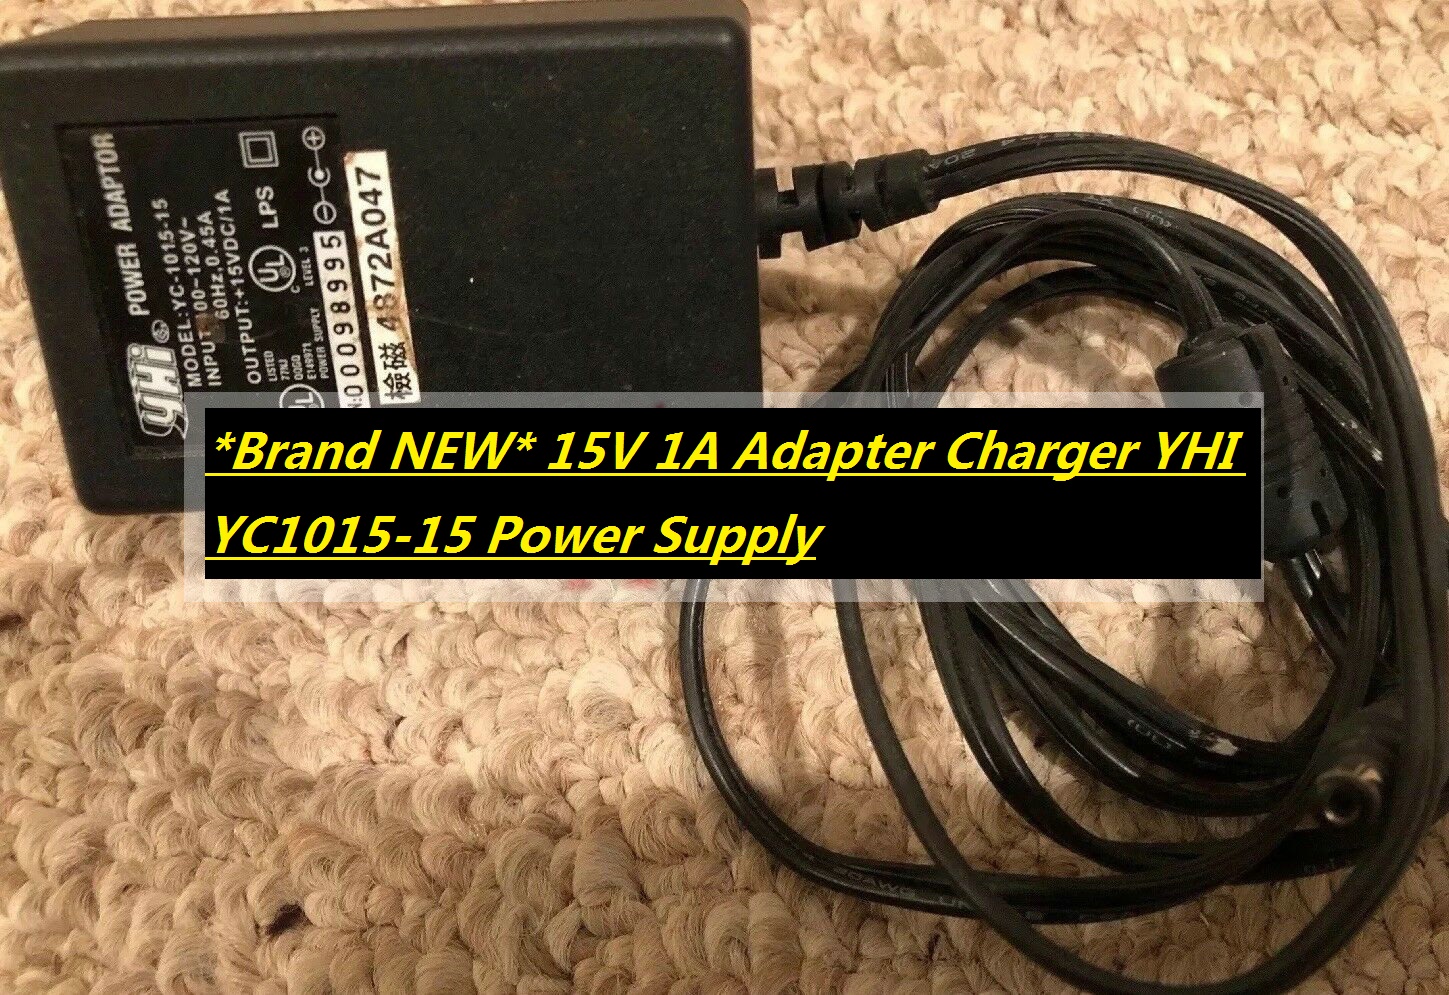 *Brand NEW* 15V 1A Adapter Charger YHI YC1015-15 Power Supply